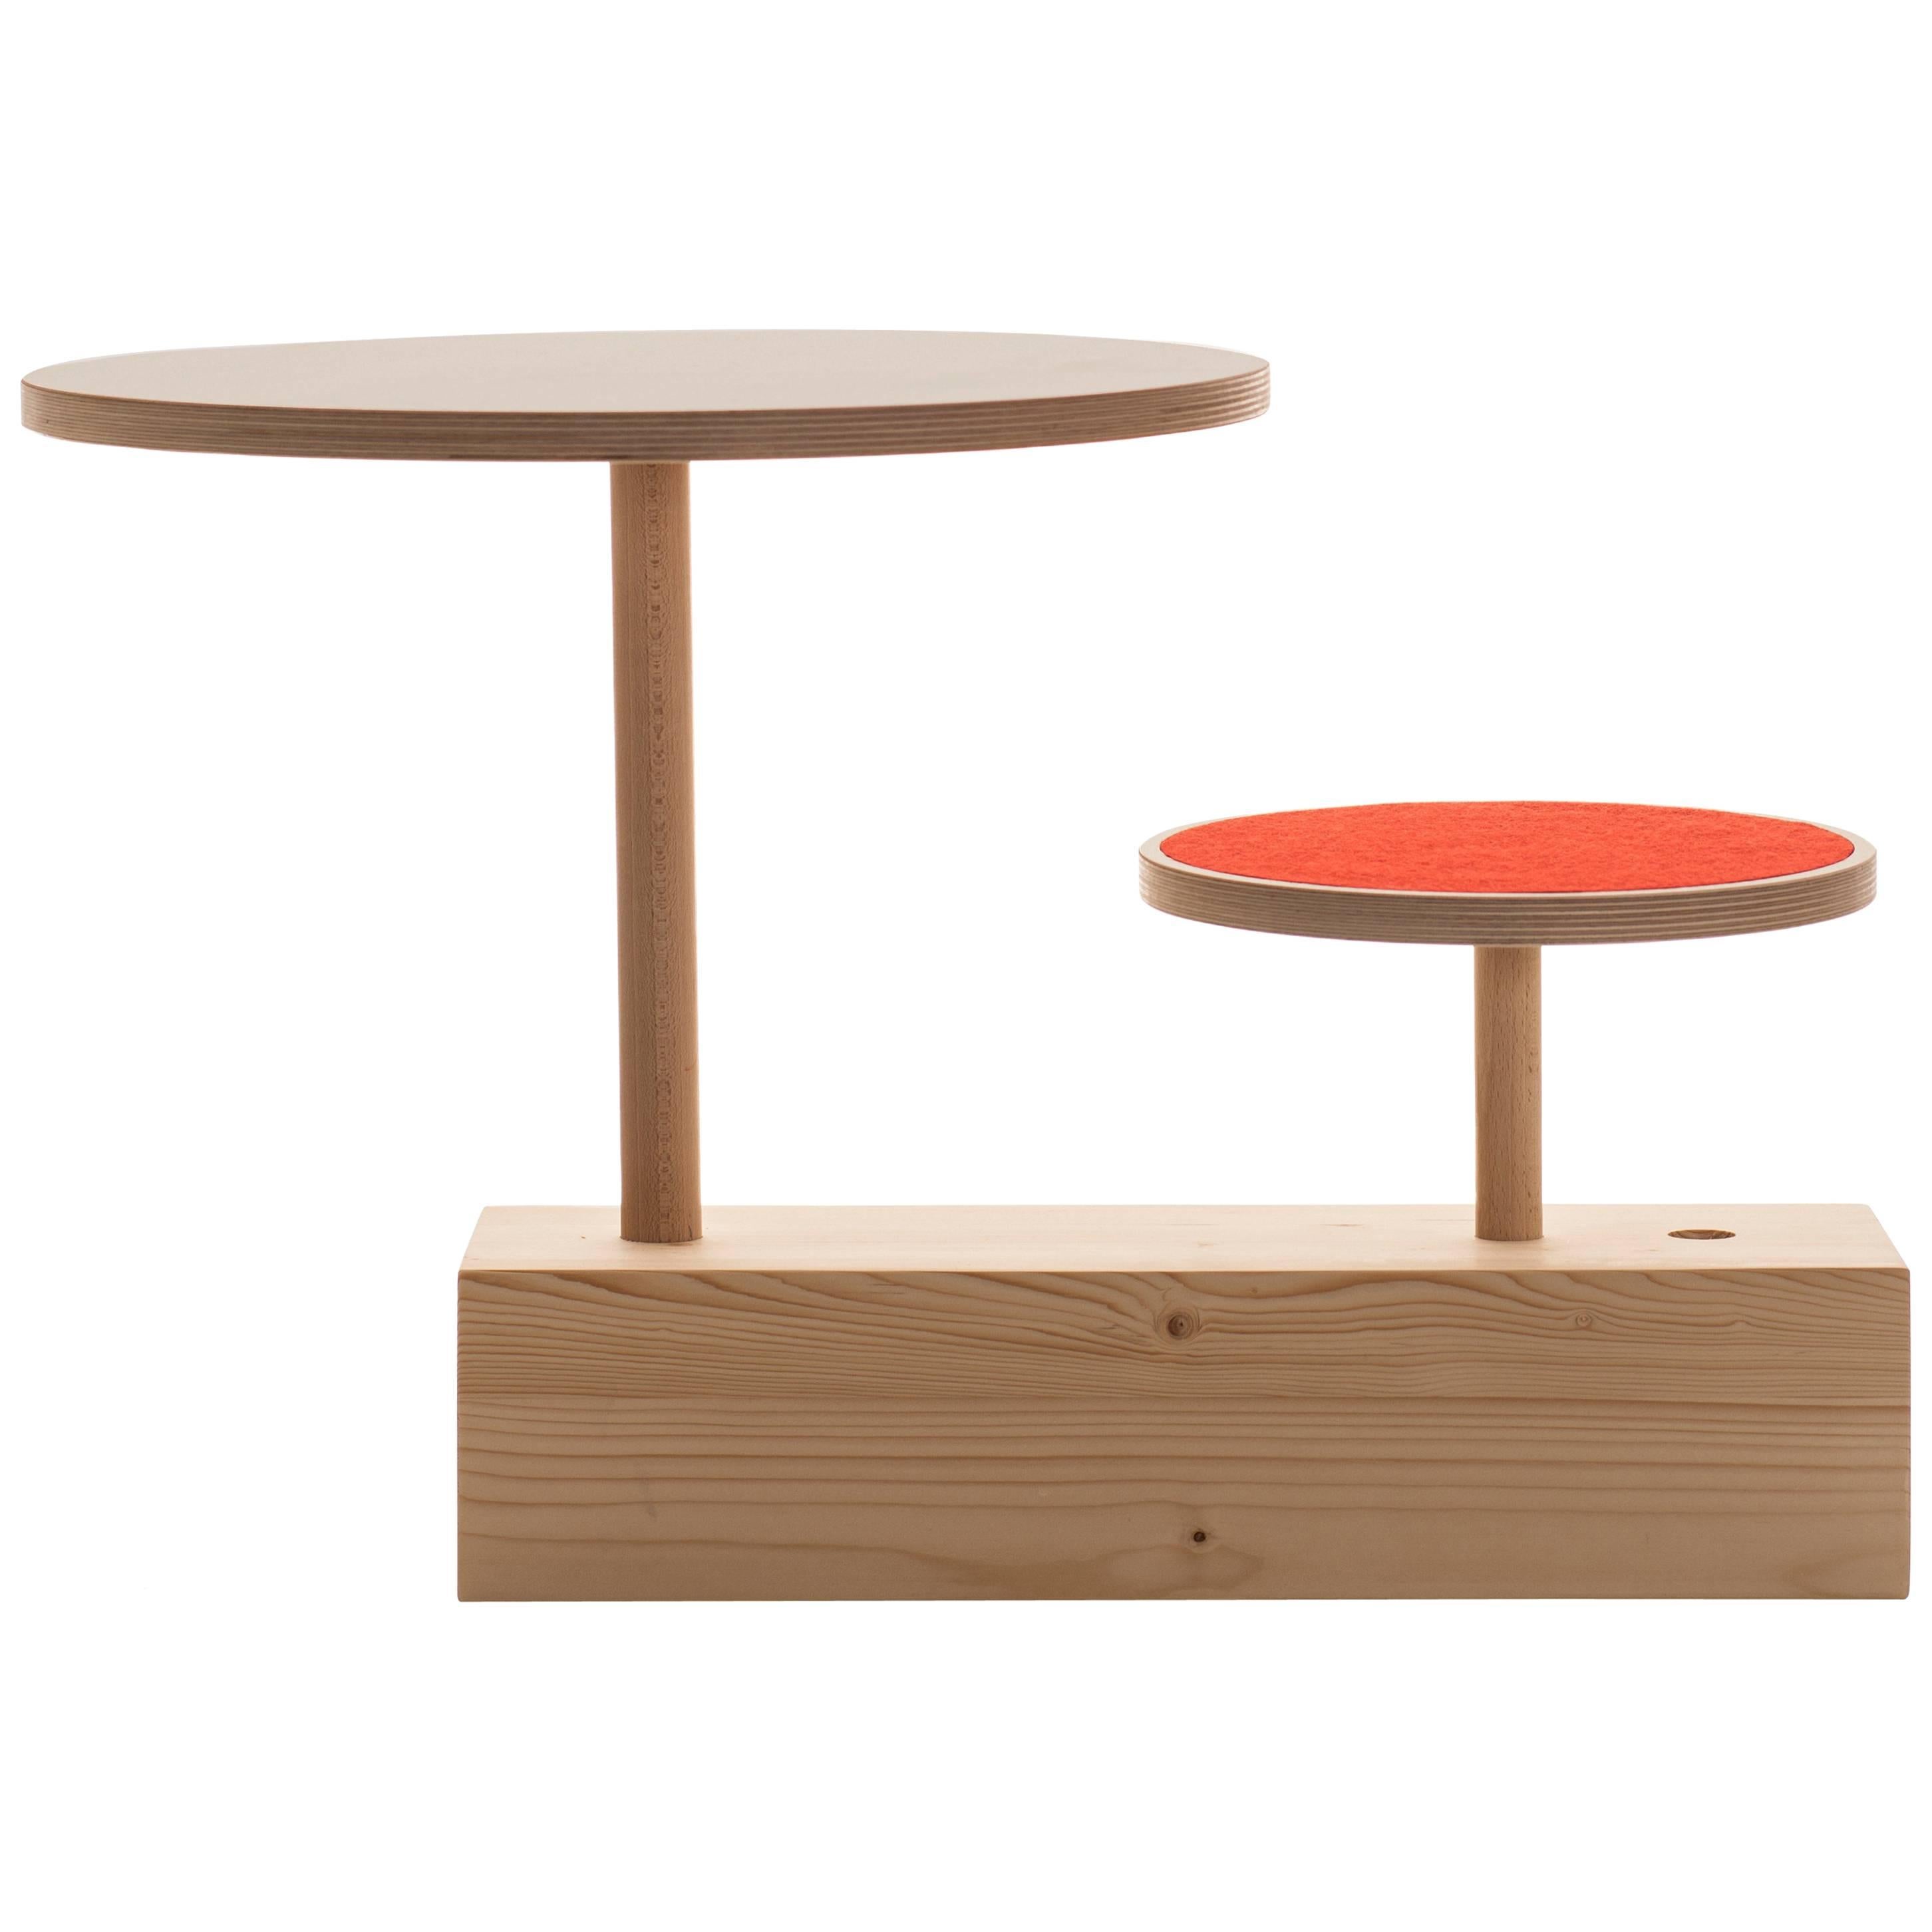 Claus Zu Tisch, Table with Stool, Designed by Sirch and Bitzer in Spruce For Sale